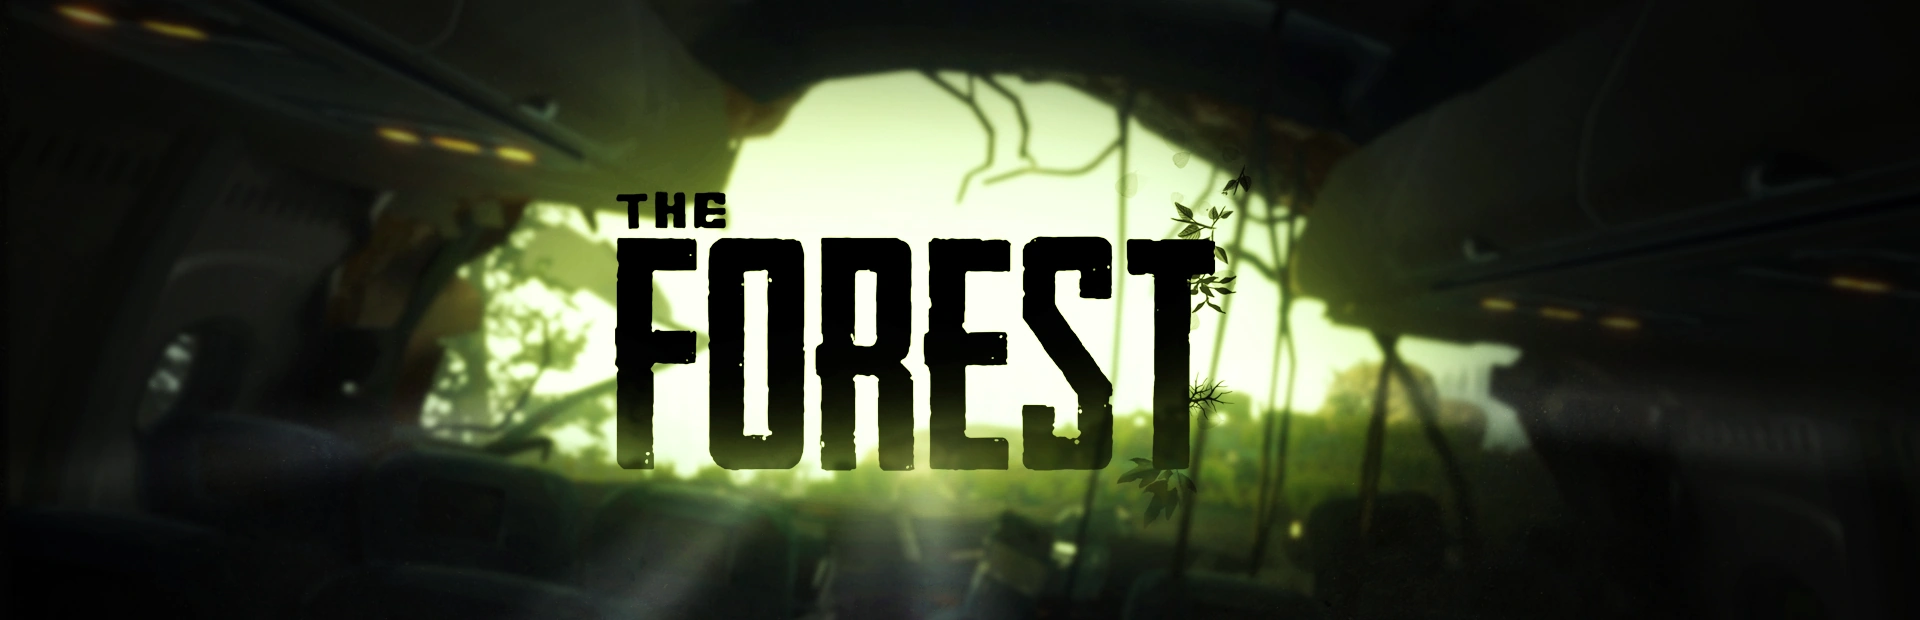 The Forest.BANNER3